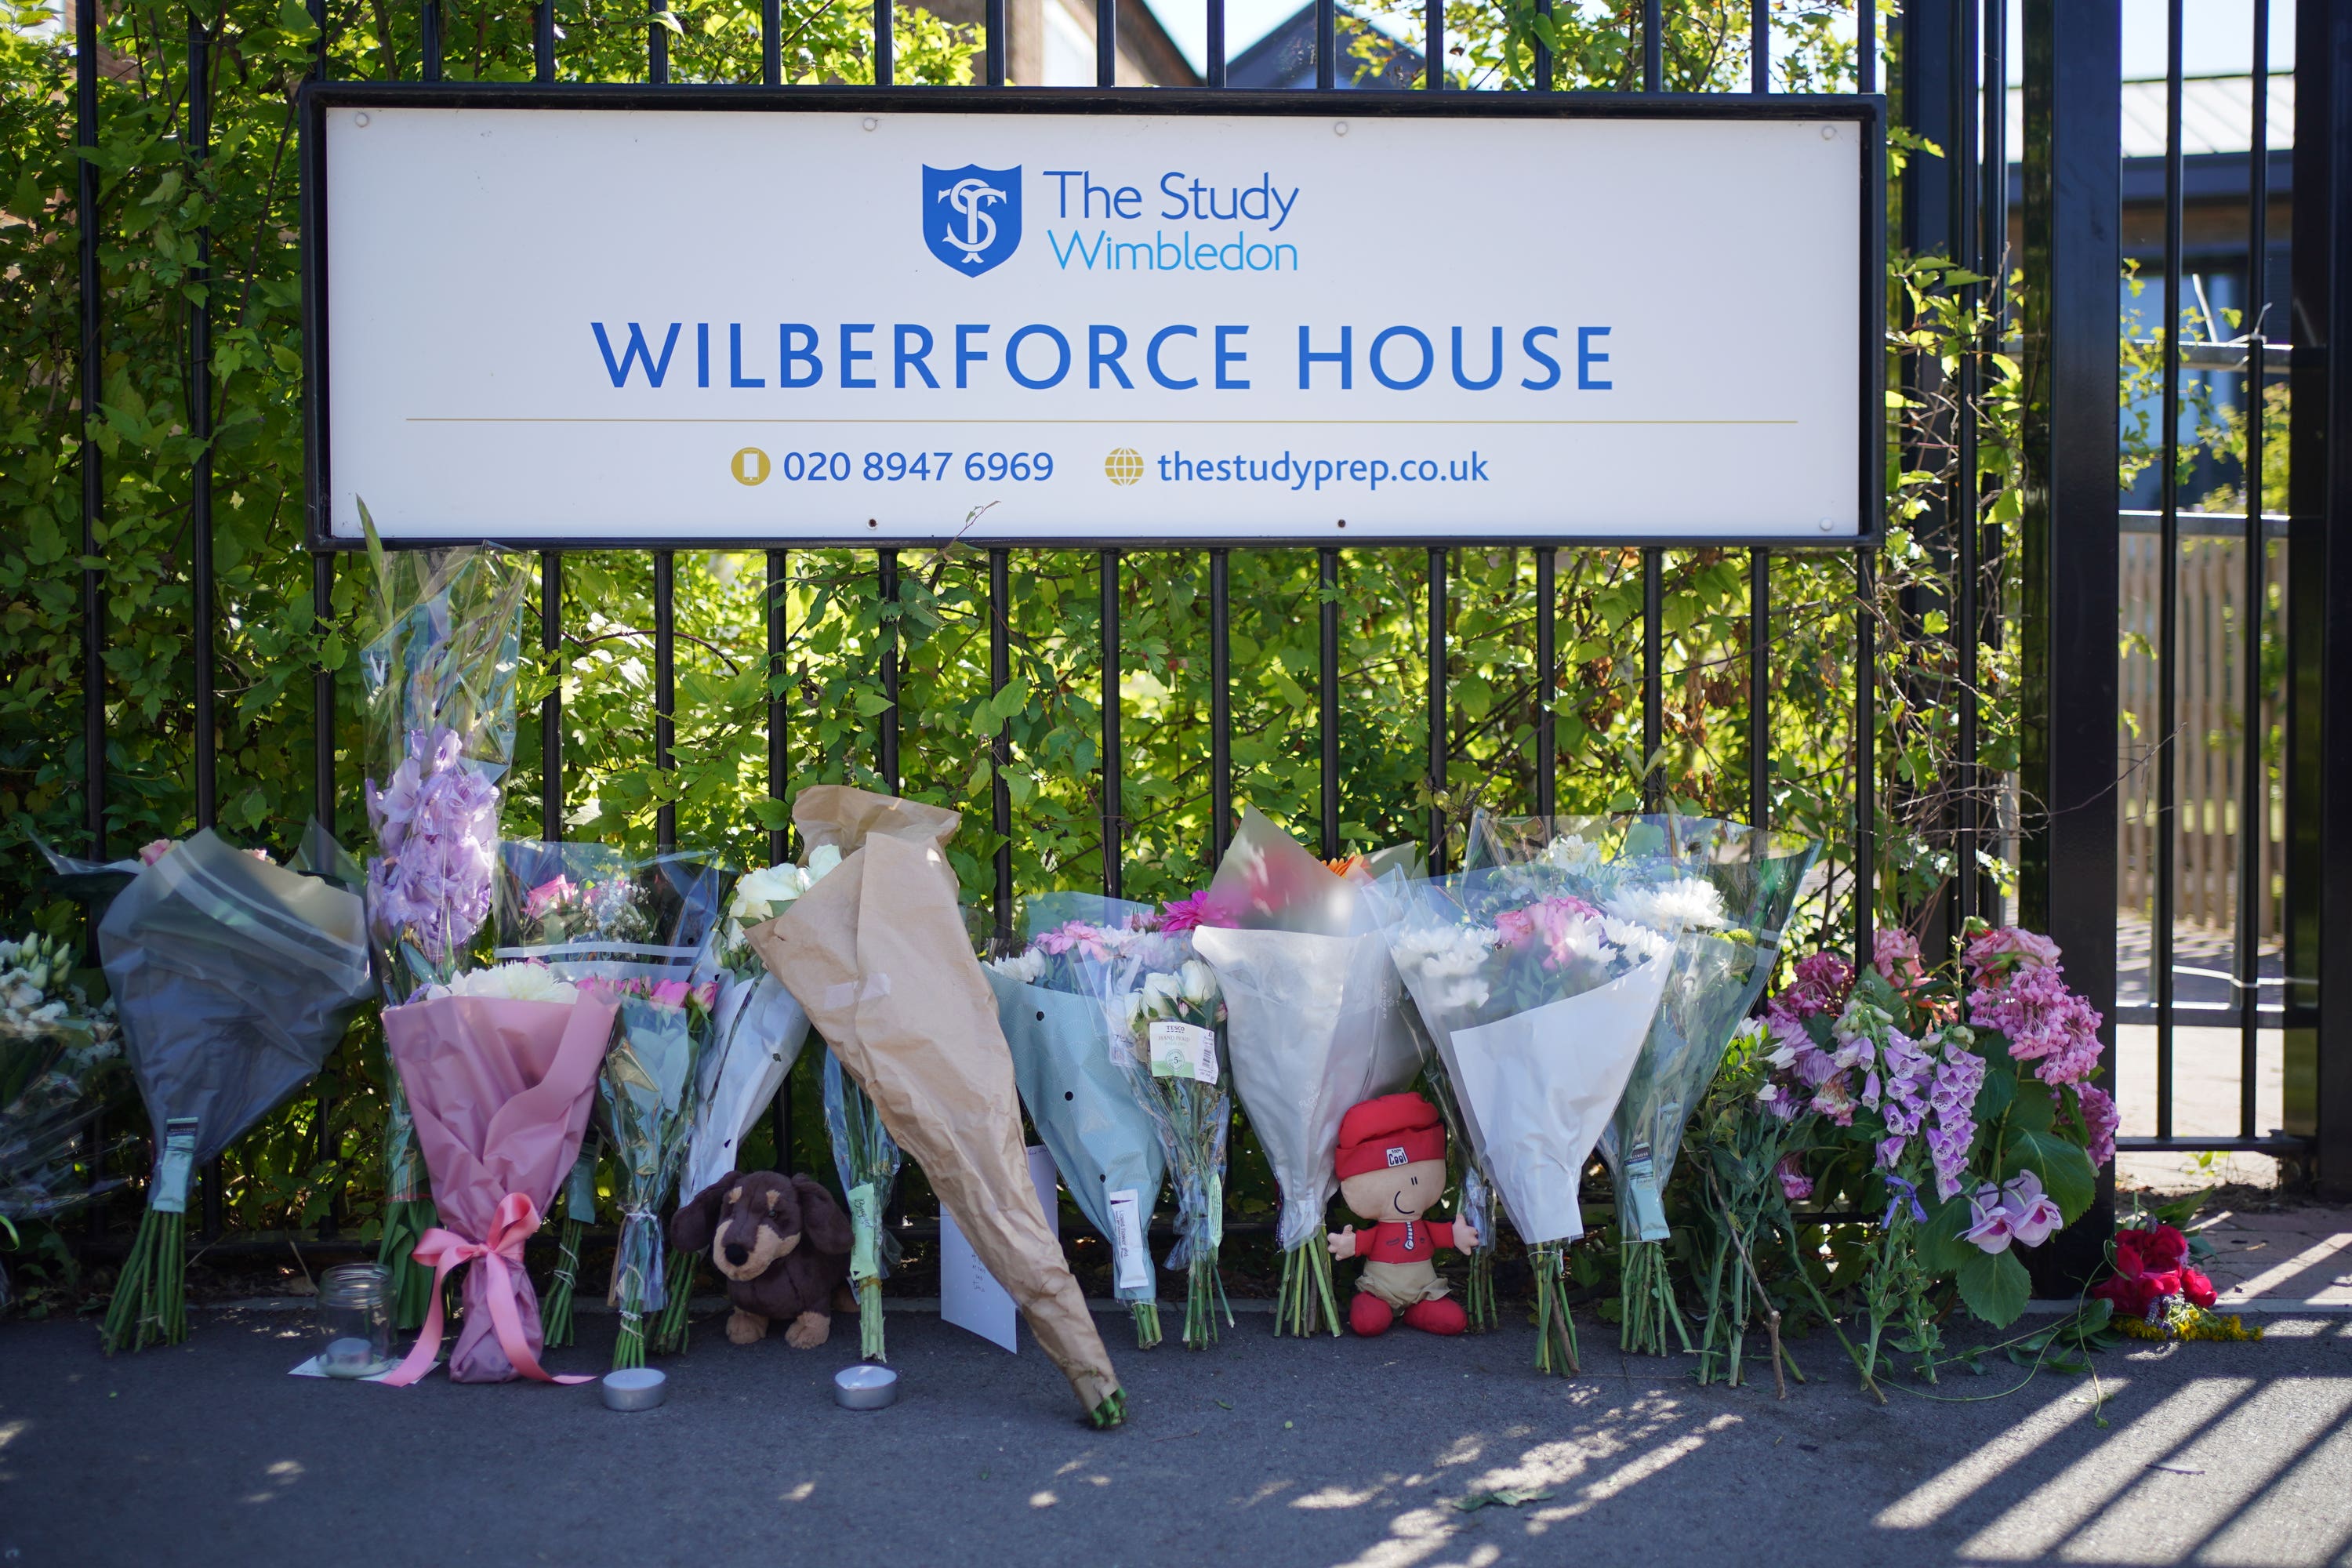 Flowers and toys placed outside the school in Wimbledon (Yui Mok/PA)